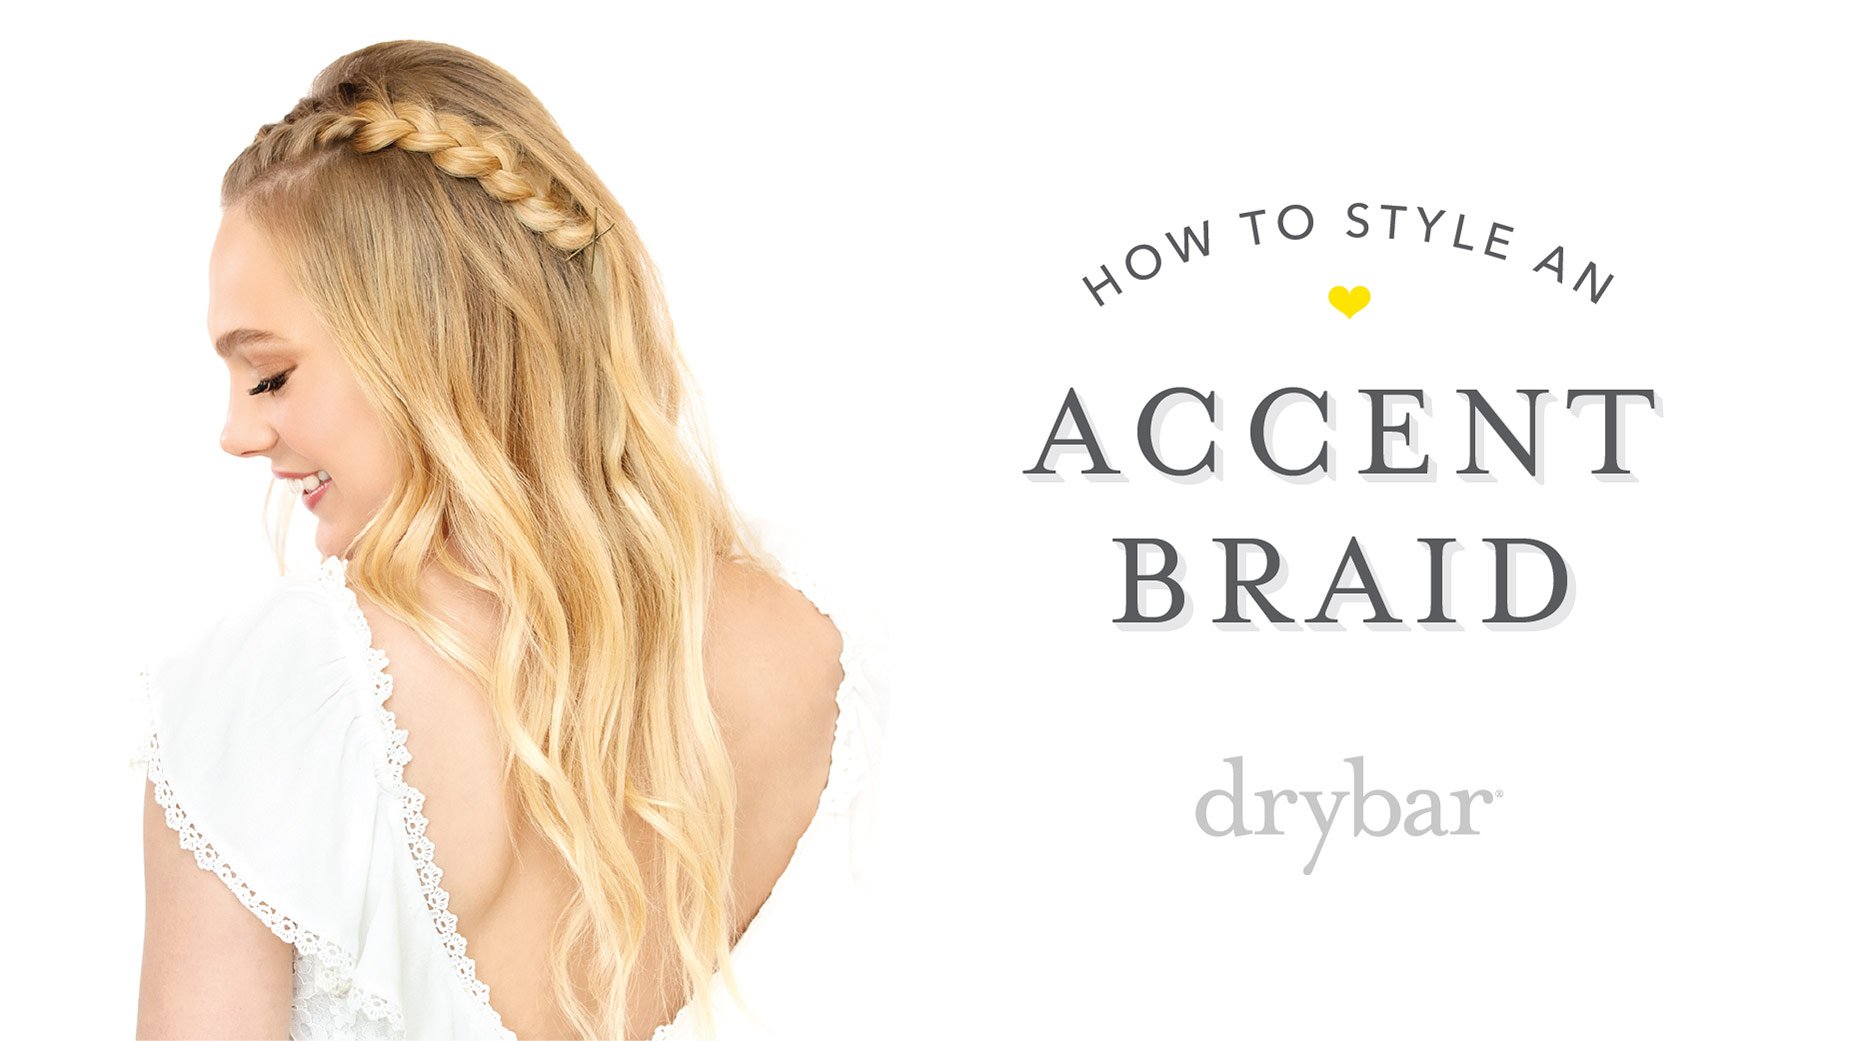 Video - Special Occasion Hairstyle: Accent Braid | Drybar